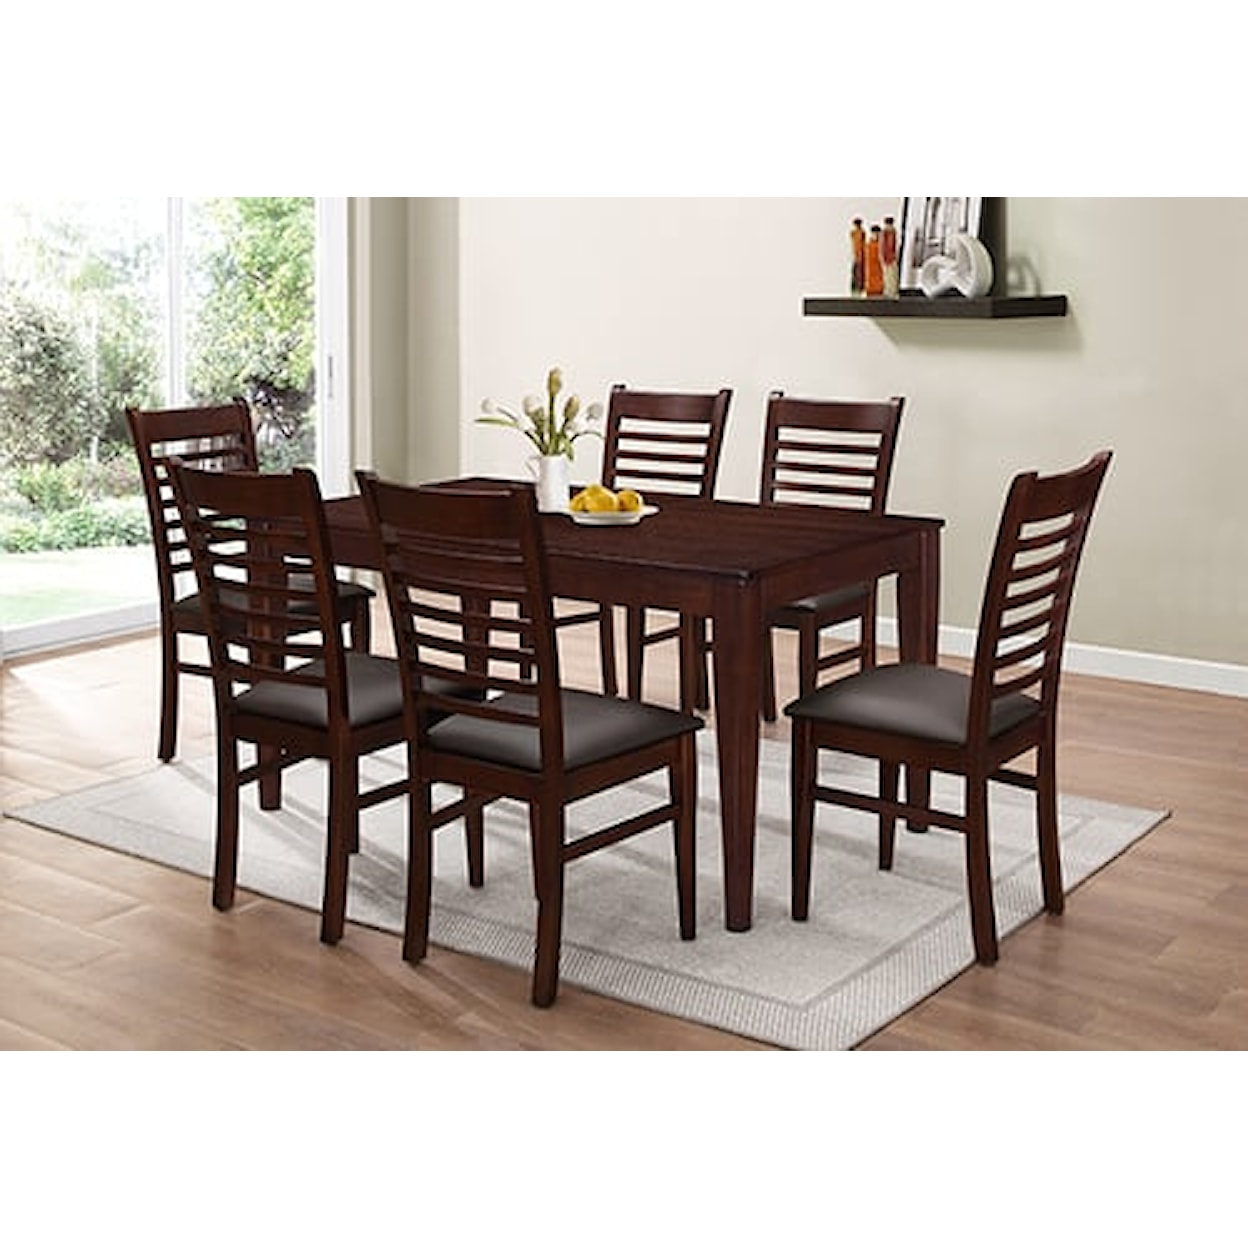 Milton Greens Stars Dining Room BRUCIE BROWN DINING TABLE |